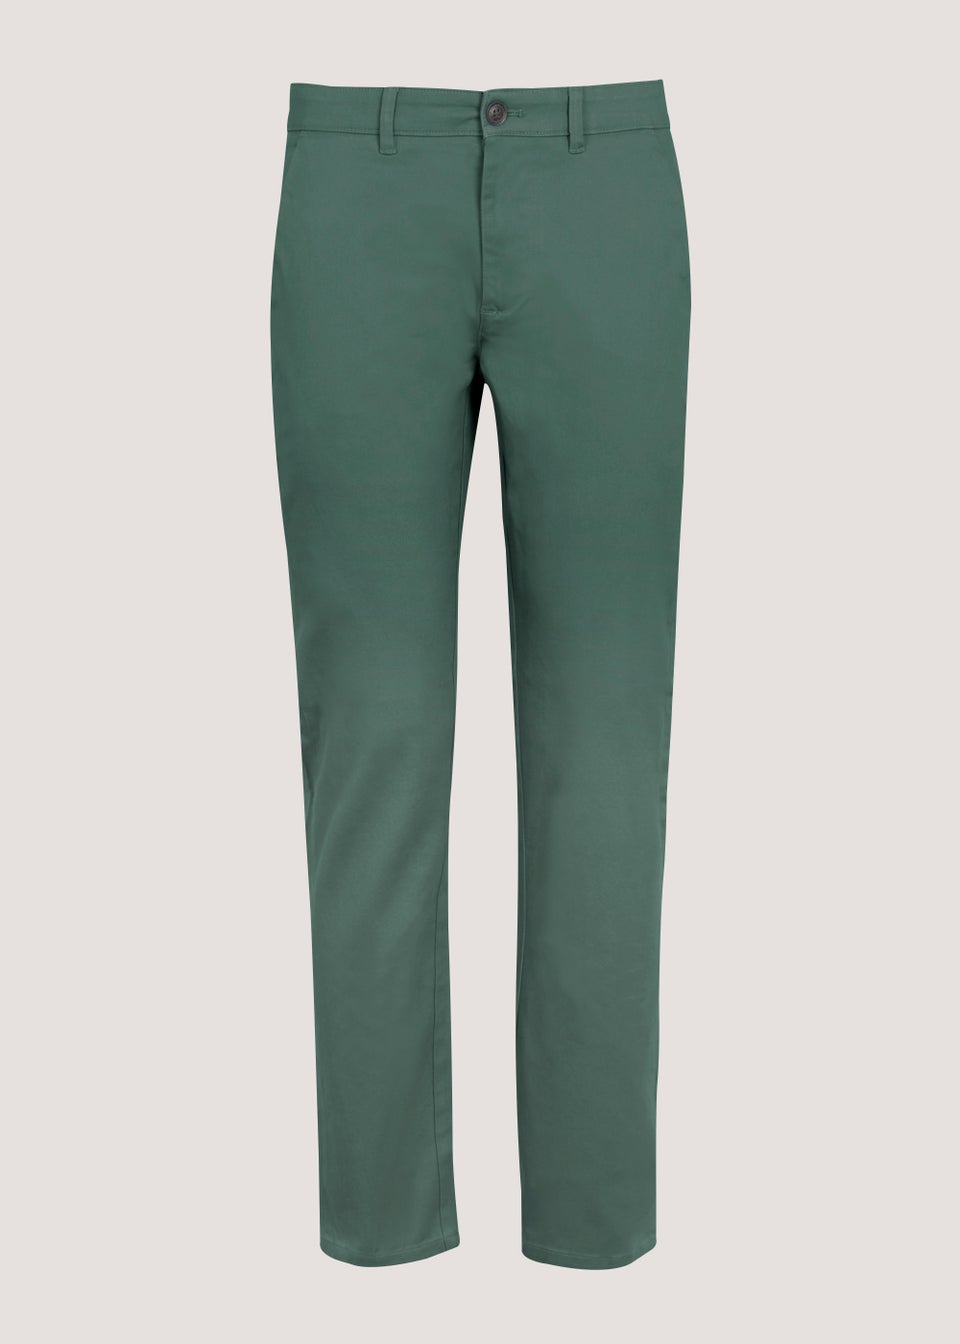 Big & Tall Teal Stretch Straight Fit Chinos - Matalan